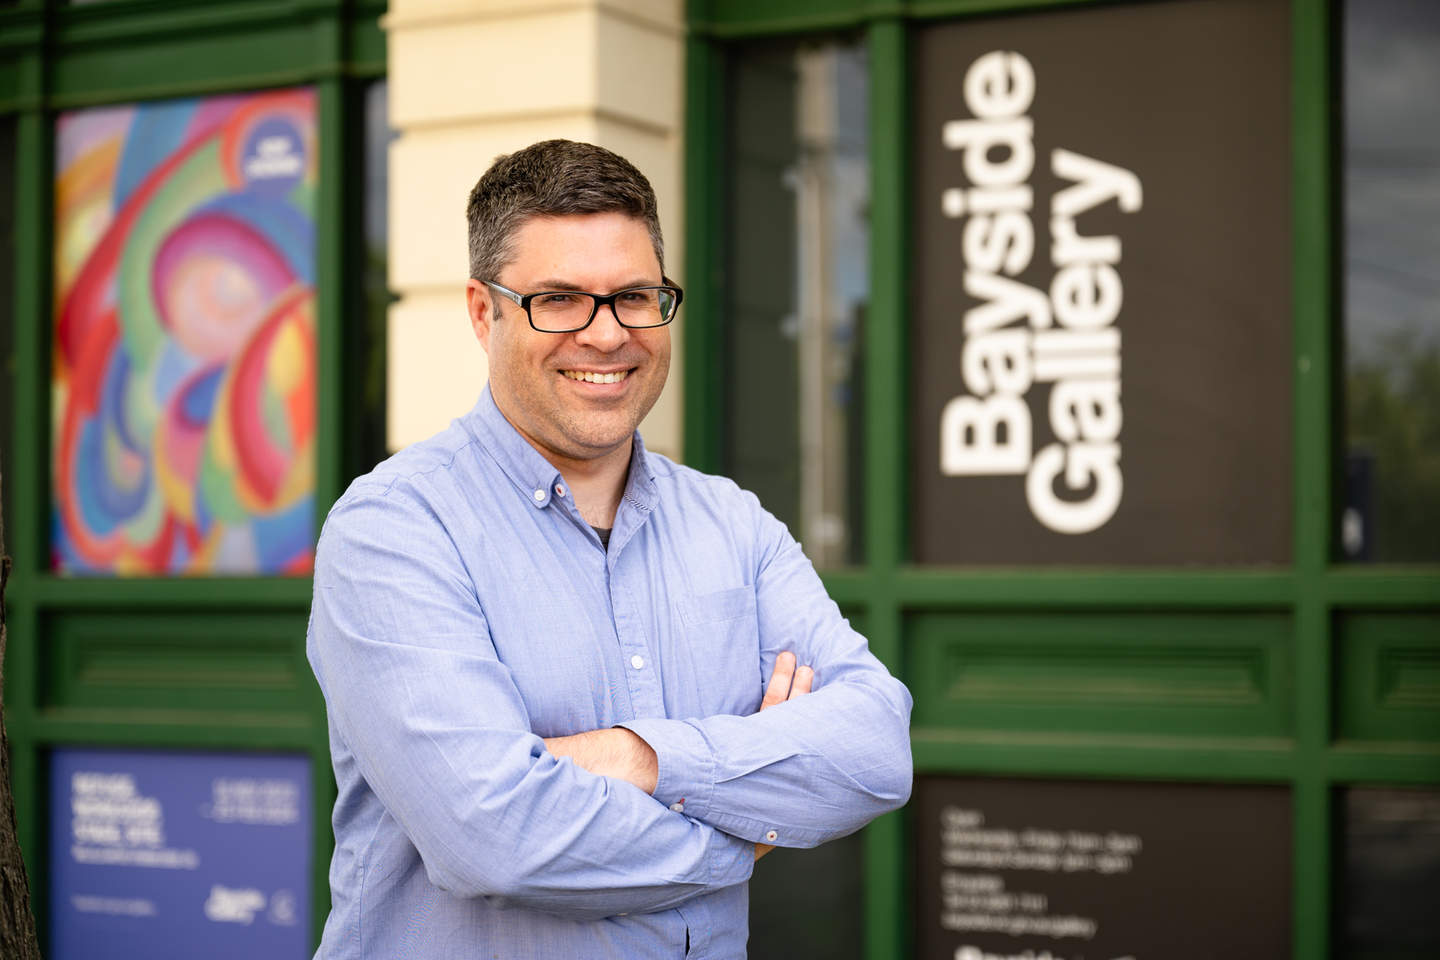 Brown haired man with glasses smiling with folded arms in front of Bayside Gallery sign